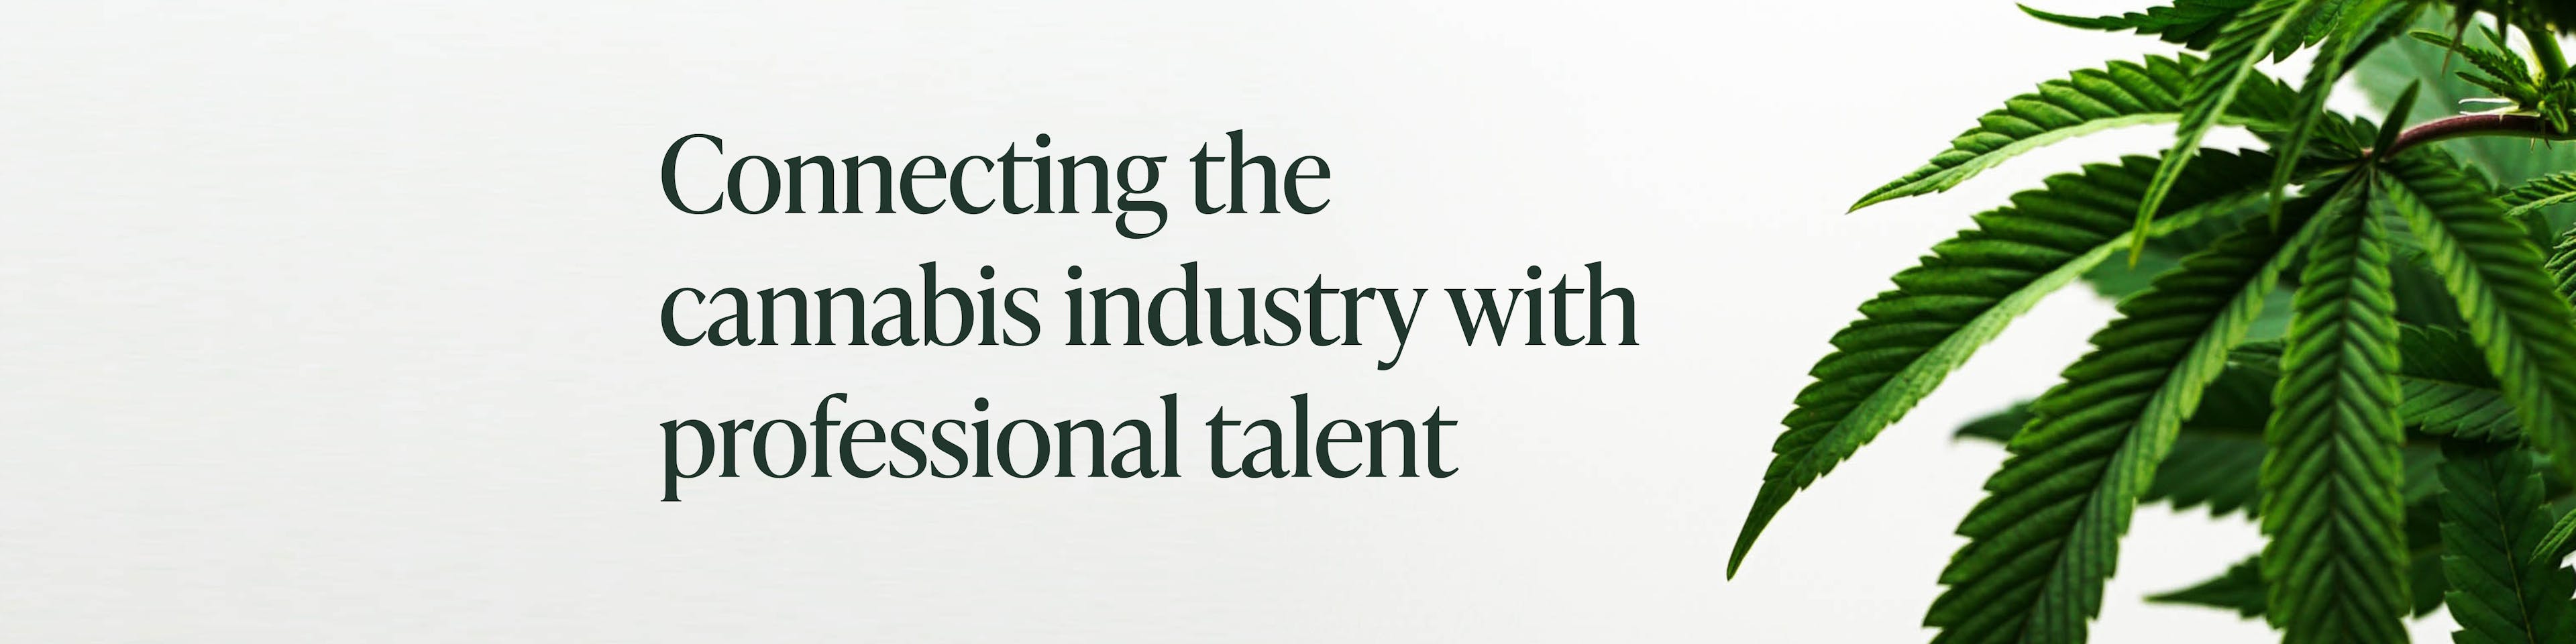 connecting the cannabis industry with professional talent